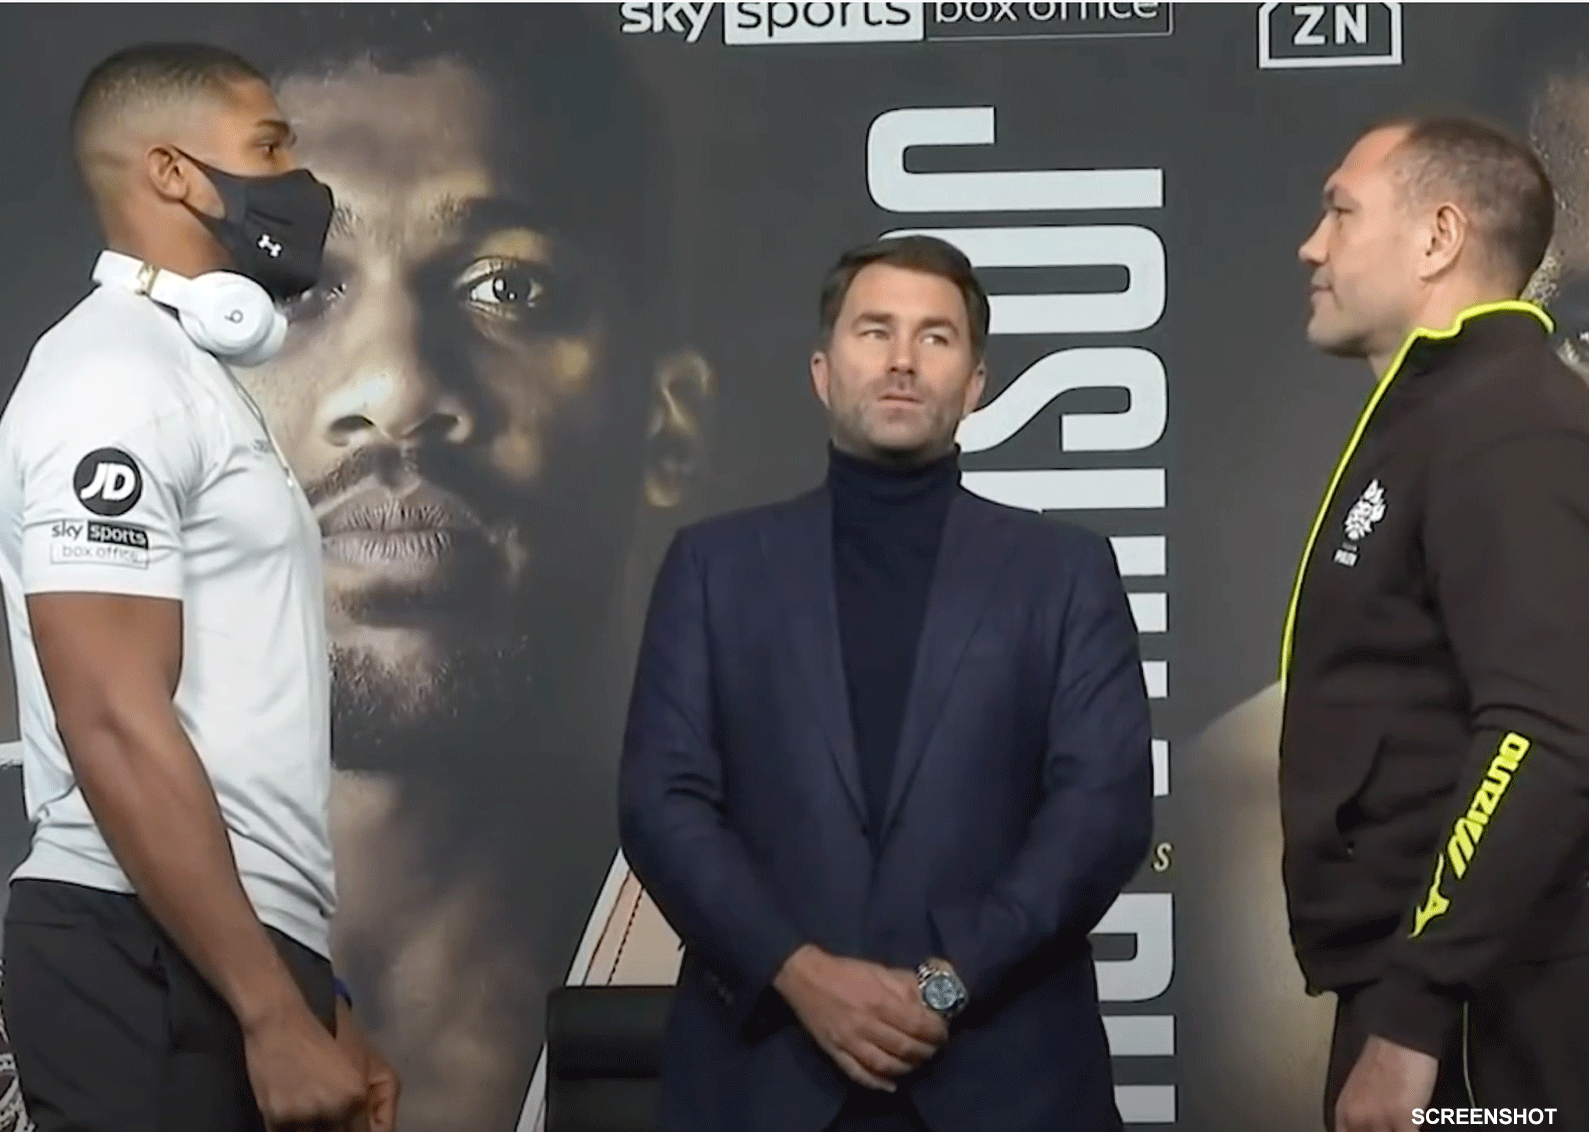 Anthony Joshua grote favoriet voor knock-out winst op Kubrat Pulev